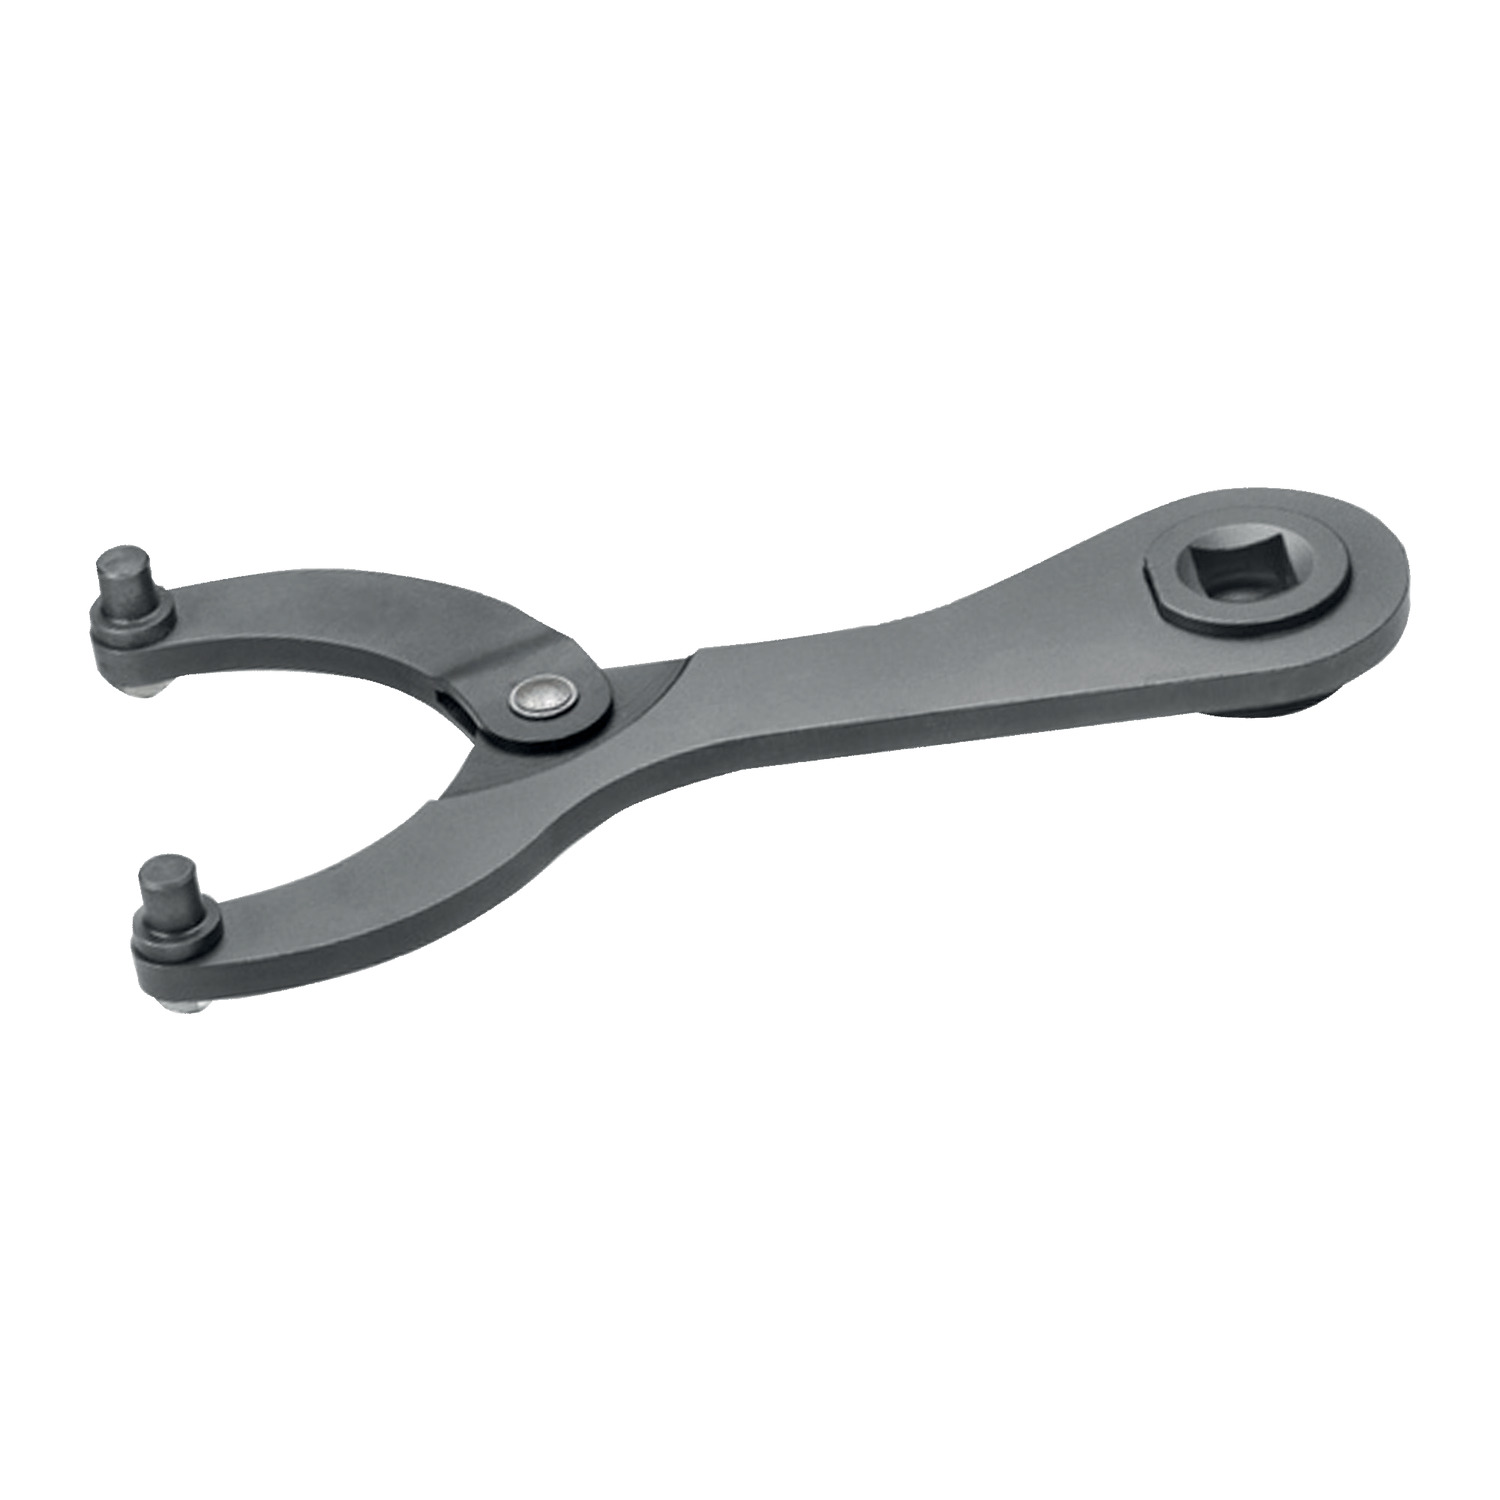 Product 95352, Adjustable Face Spanner with replaceable pins - for torque socket wrench / 